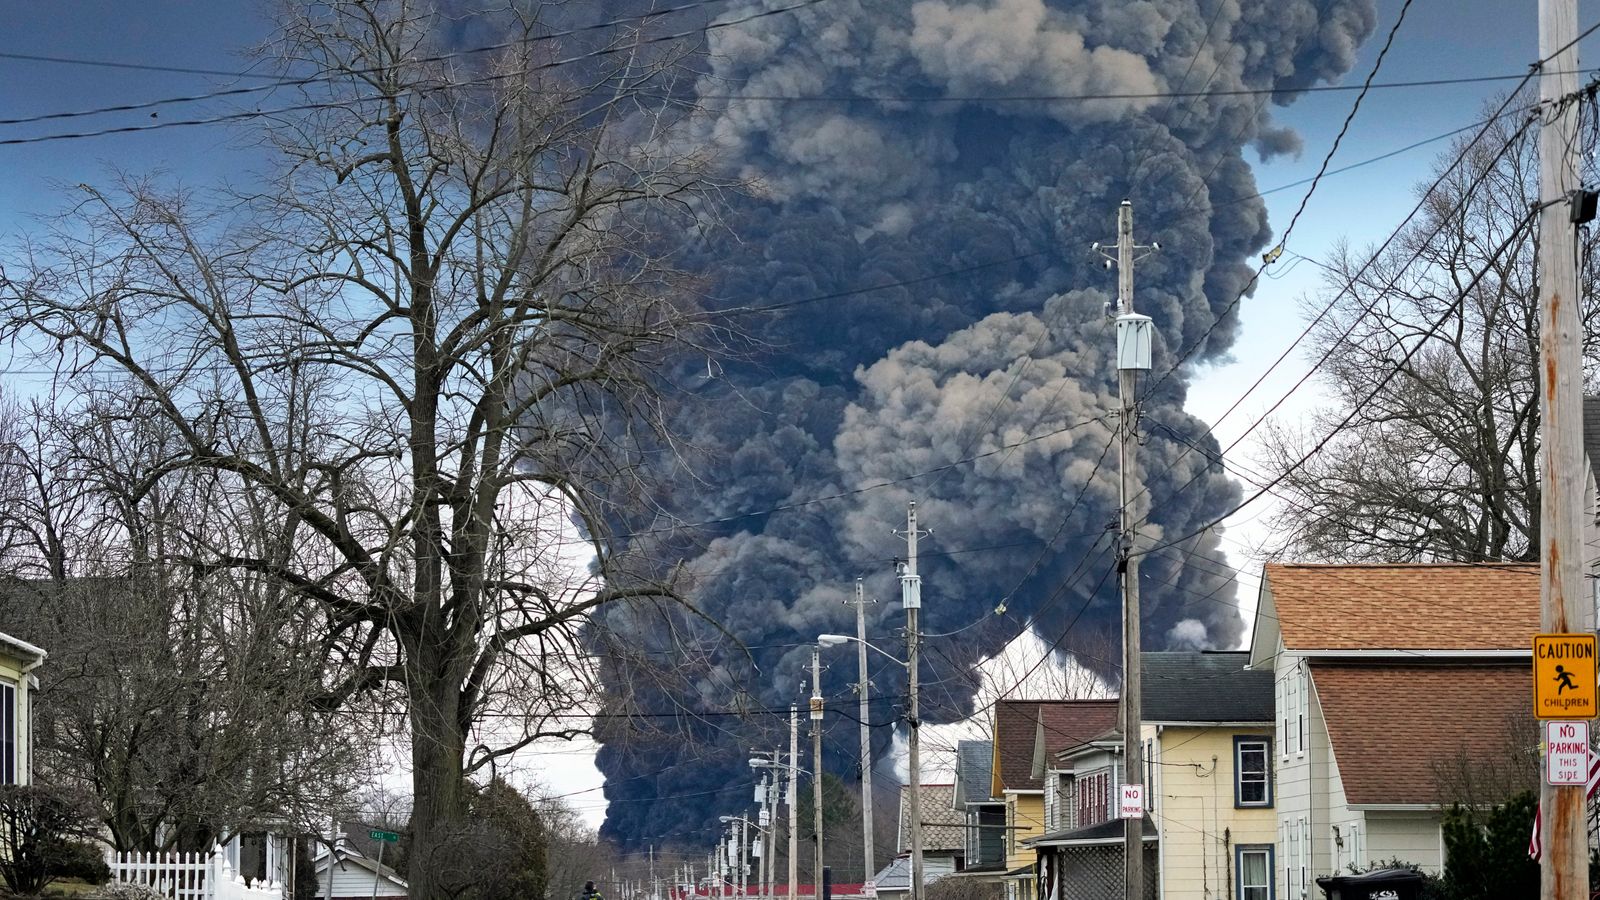 Ohio crews release toxic chemicals from derailed freight train to avert explosion after evacuation